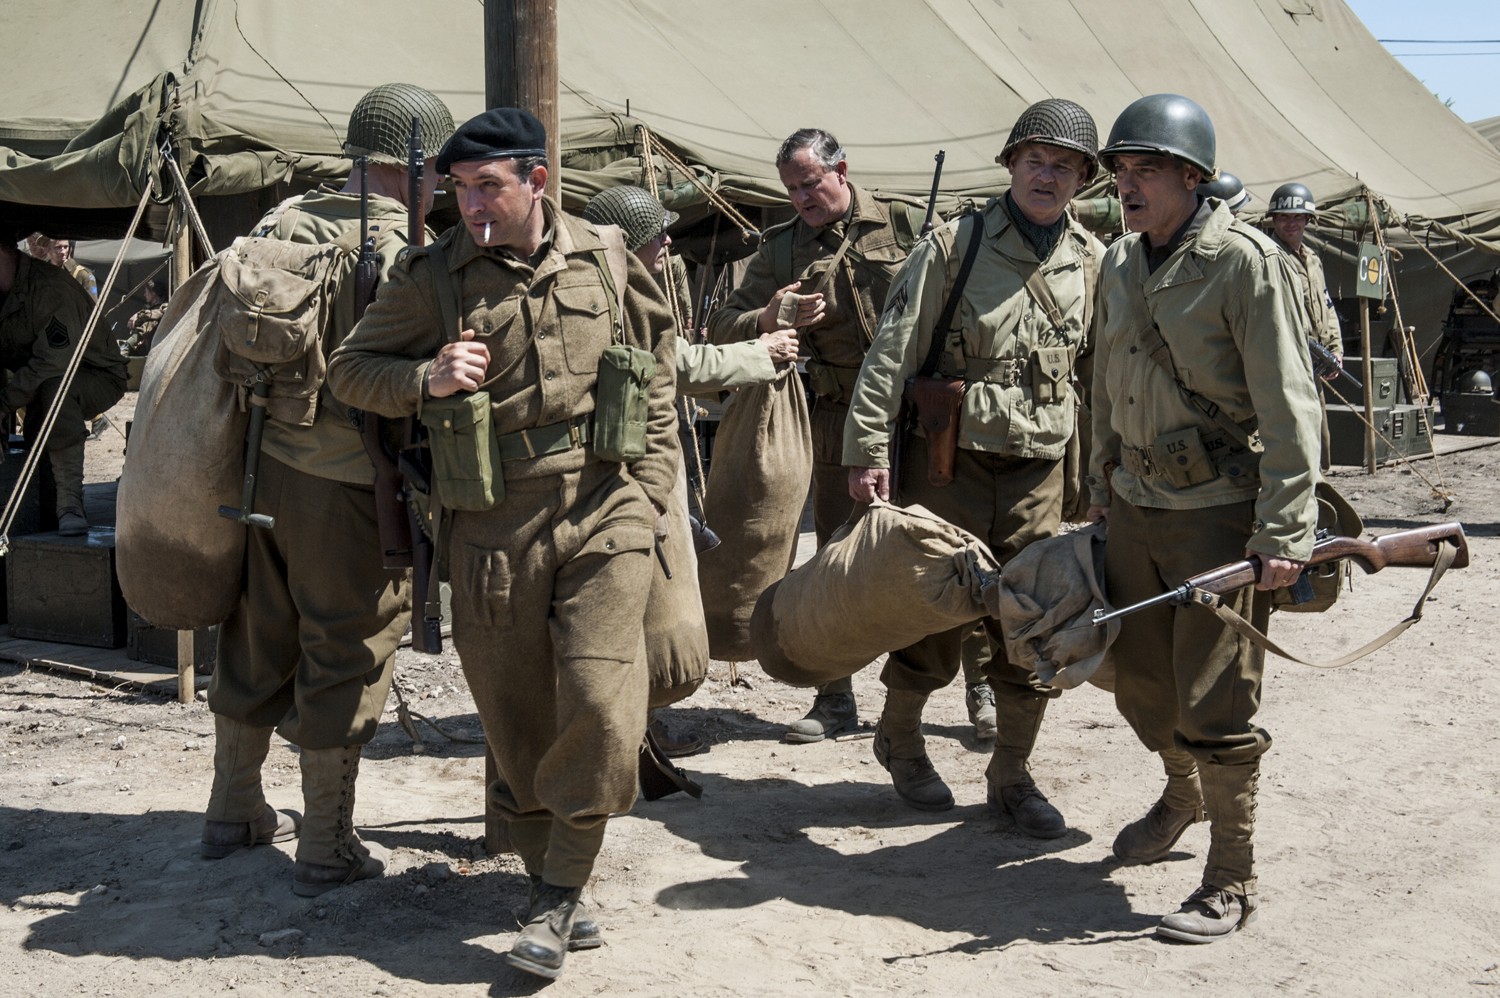 Jean Dujardin, Hugh Bonneville, Bob Balaban and George Clooney in Columbia Pictures' The Monuments Men (2014)